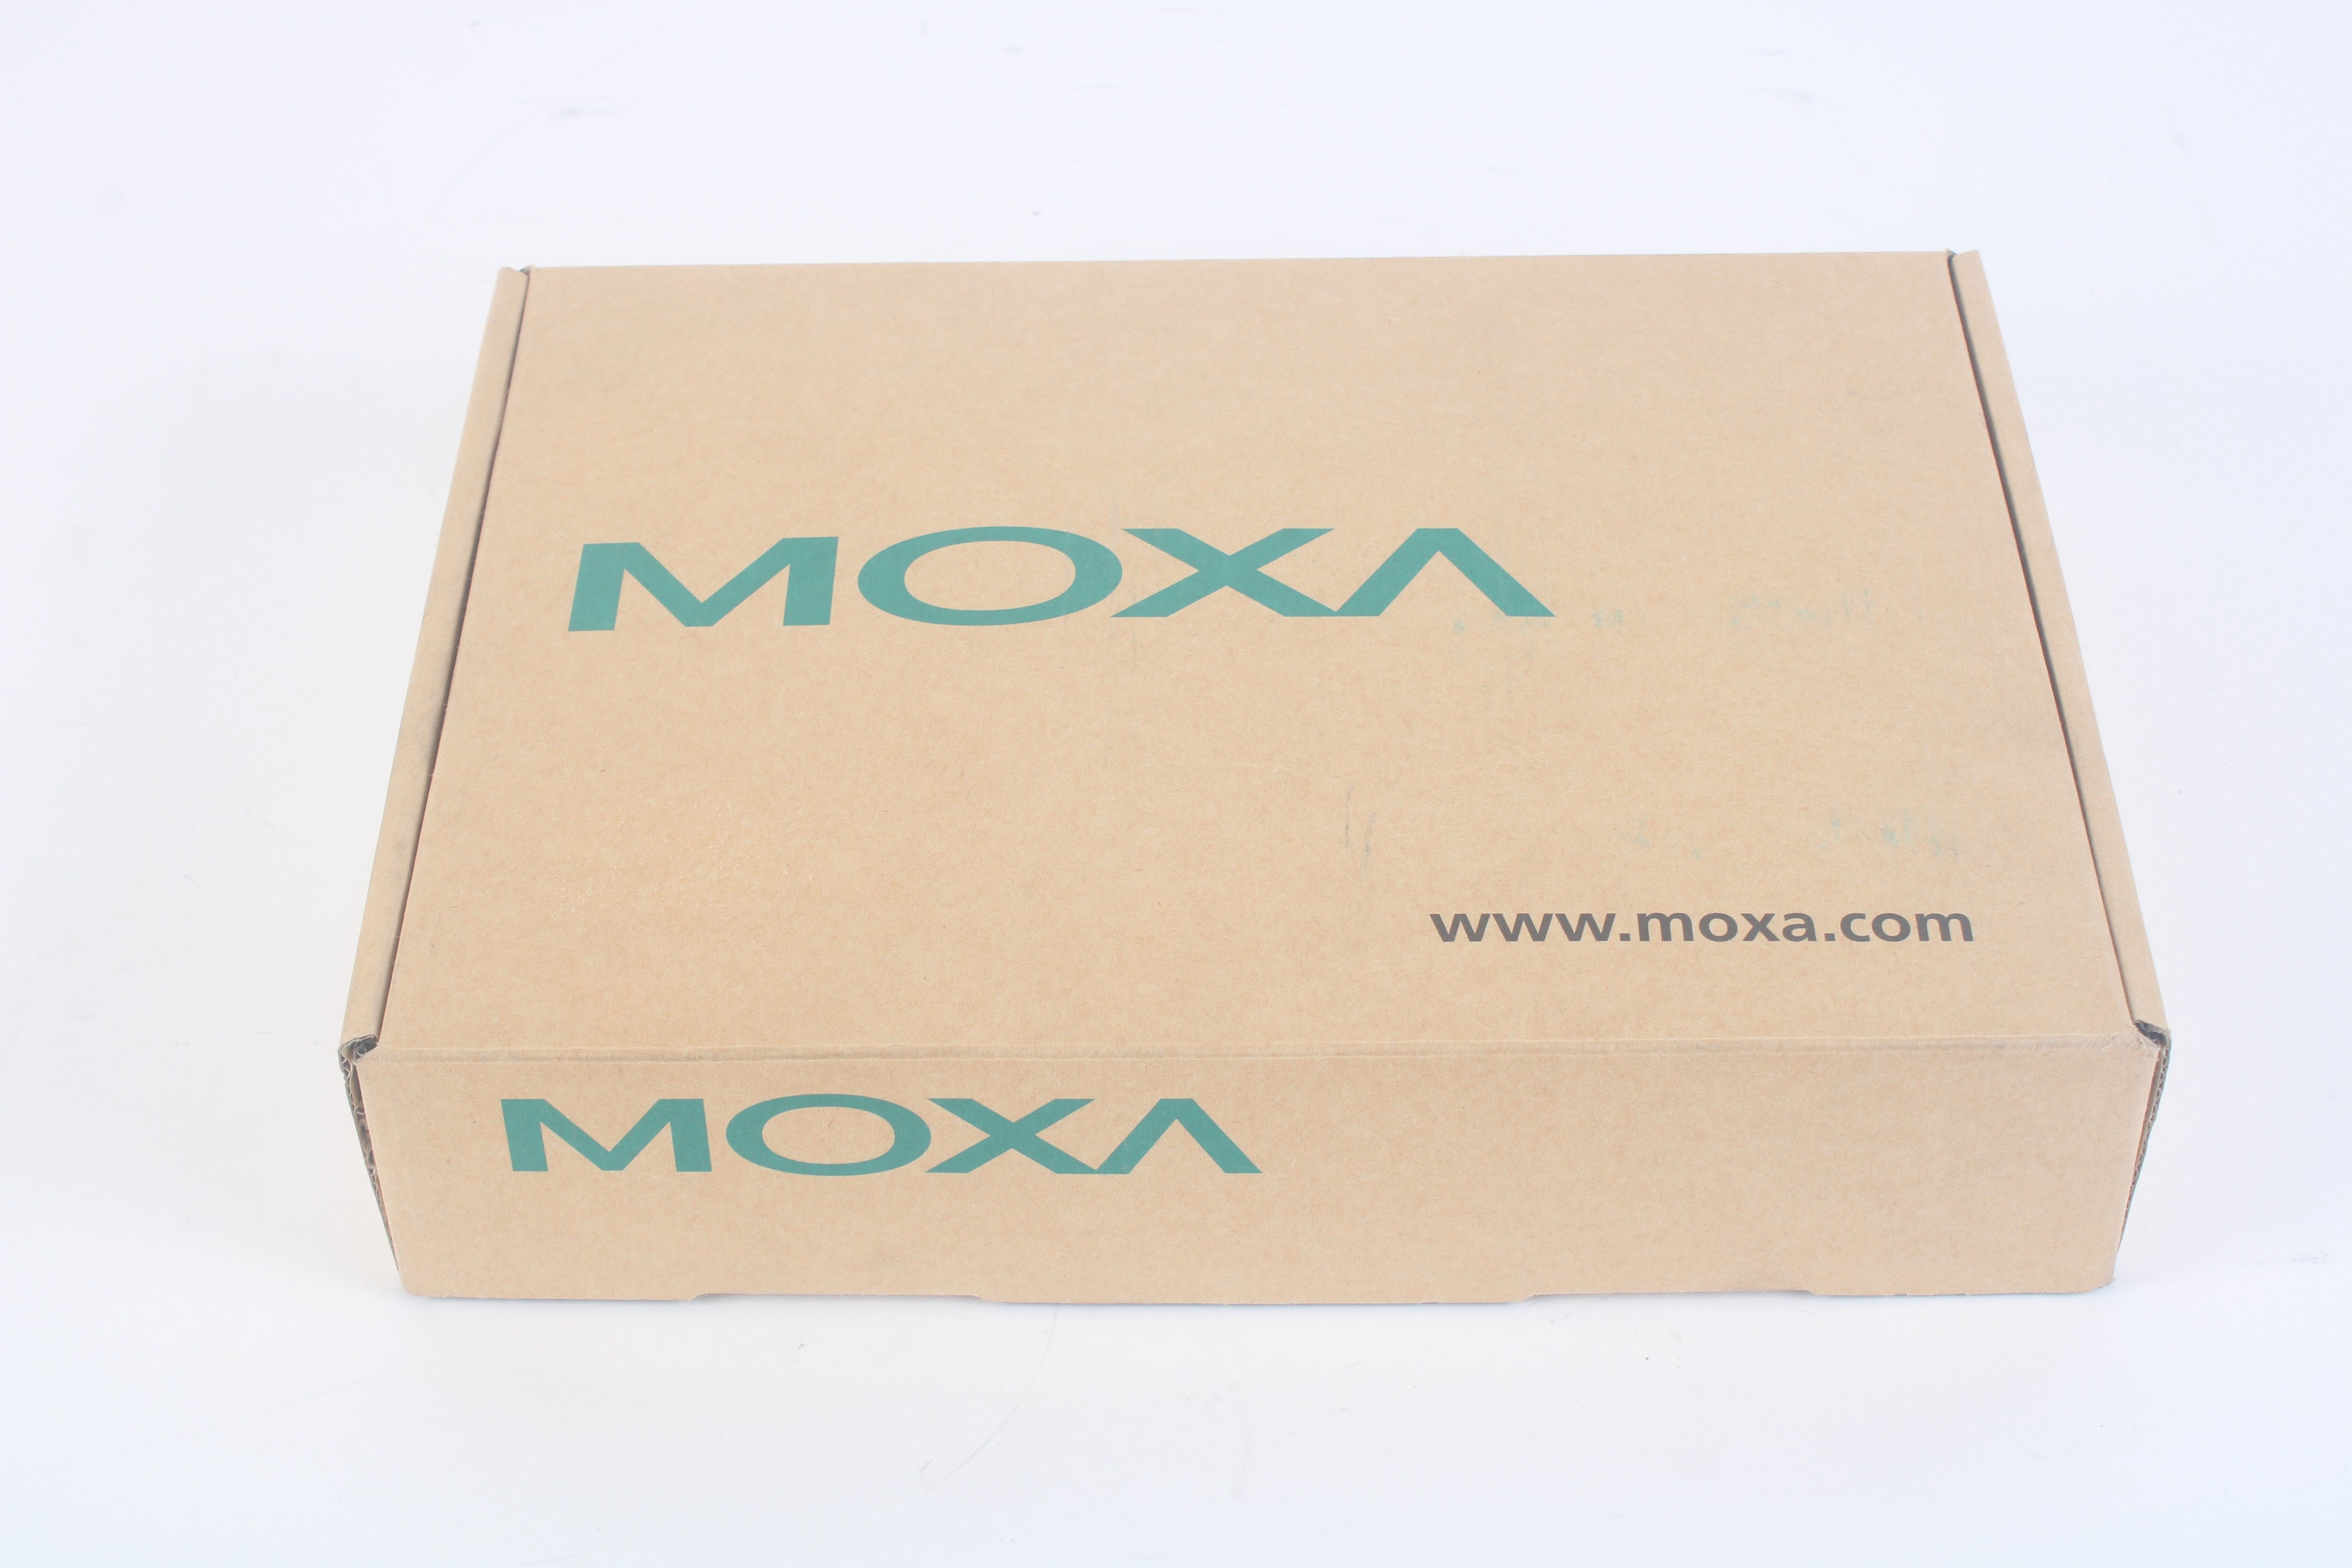 Moxa OPT8-M9 8 Port Connection Box W/ Cable - New Open Box